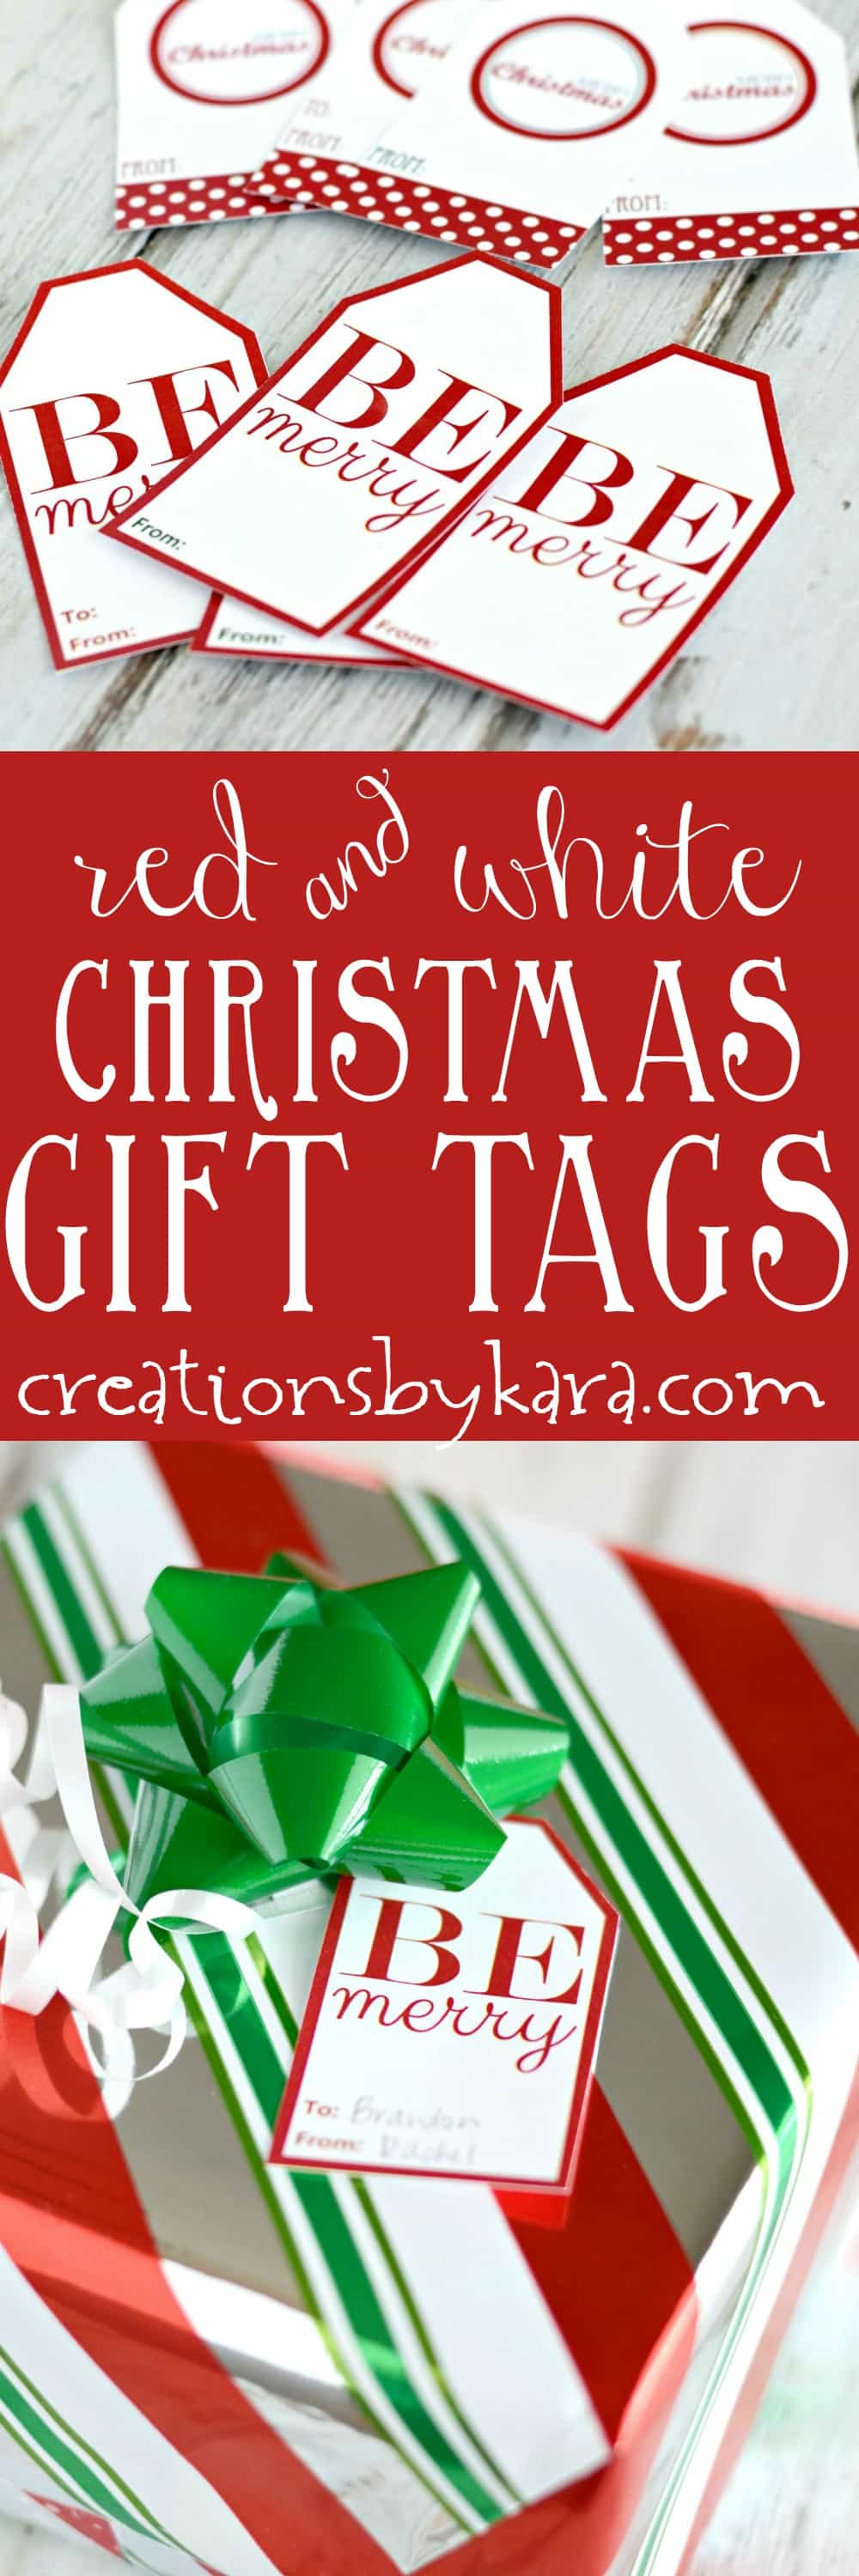 red-and-white-christmas-gift-tags-free-printable-creations-by-kara